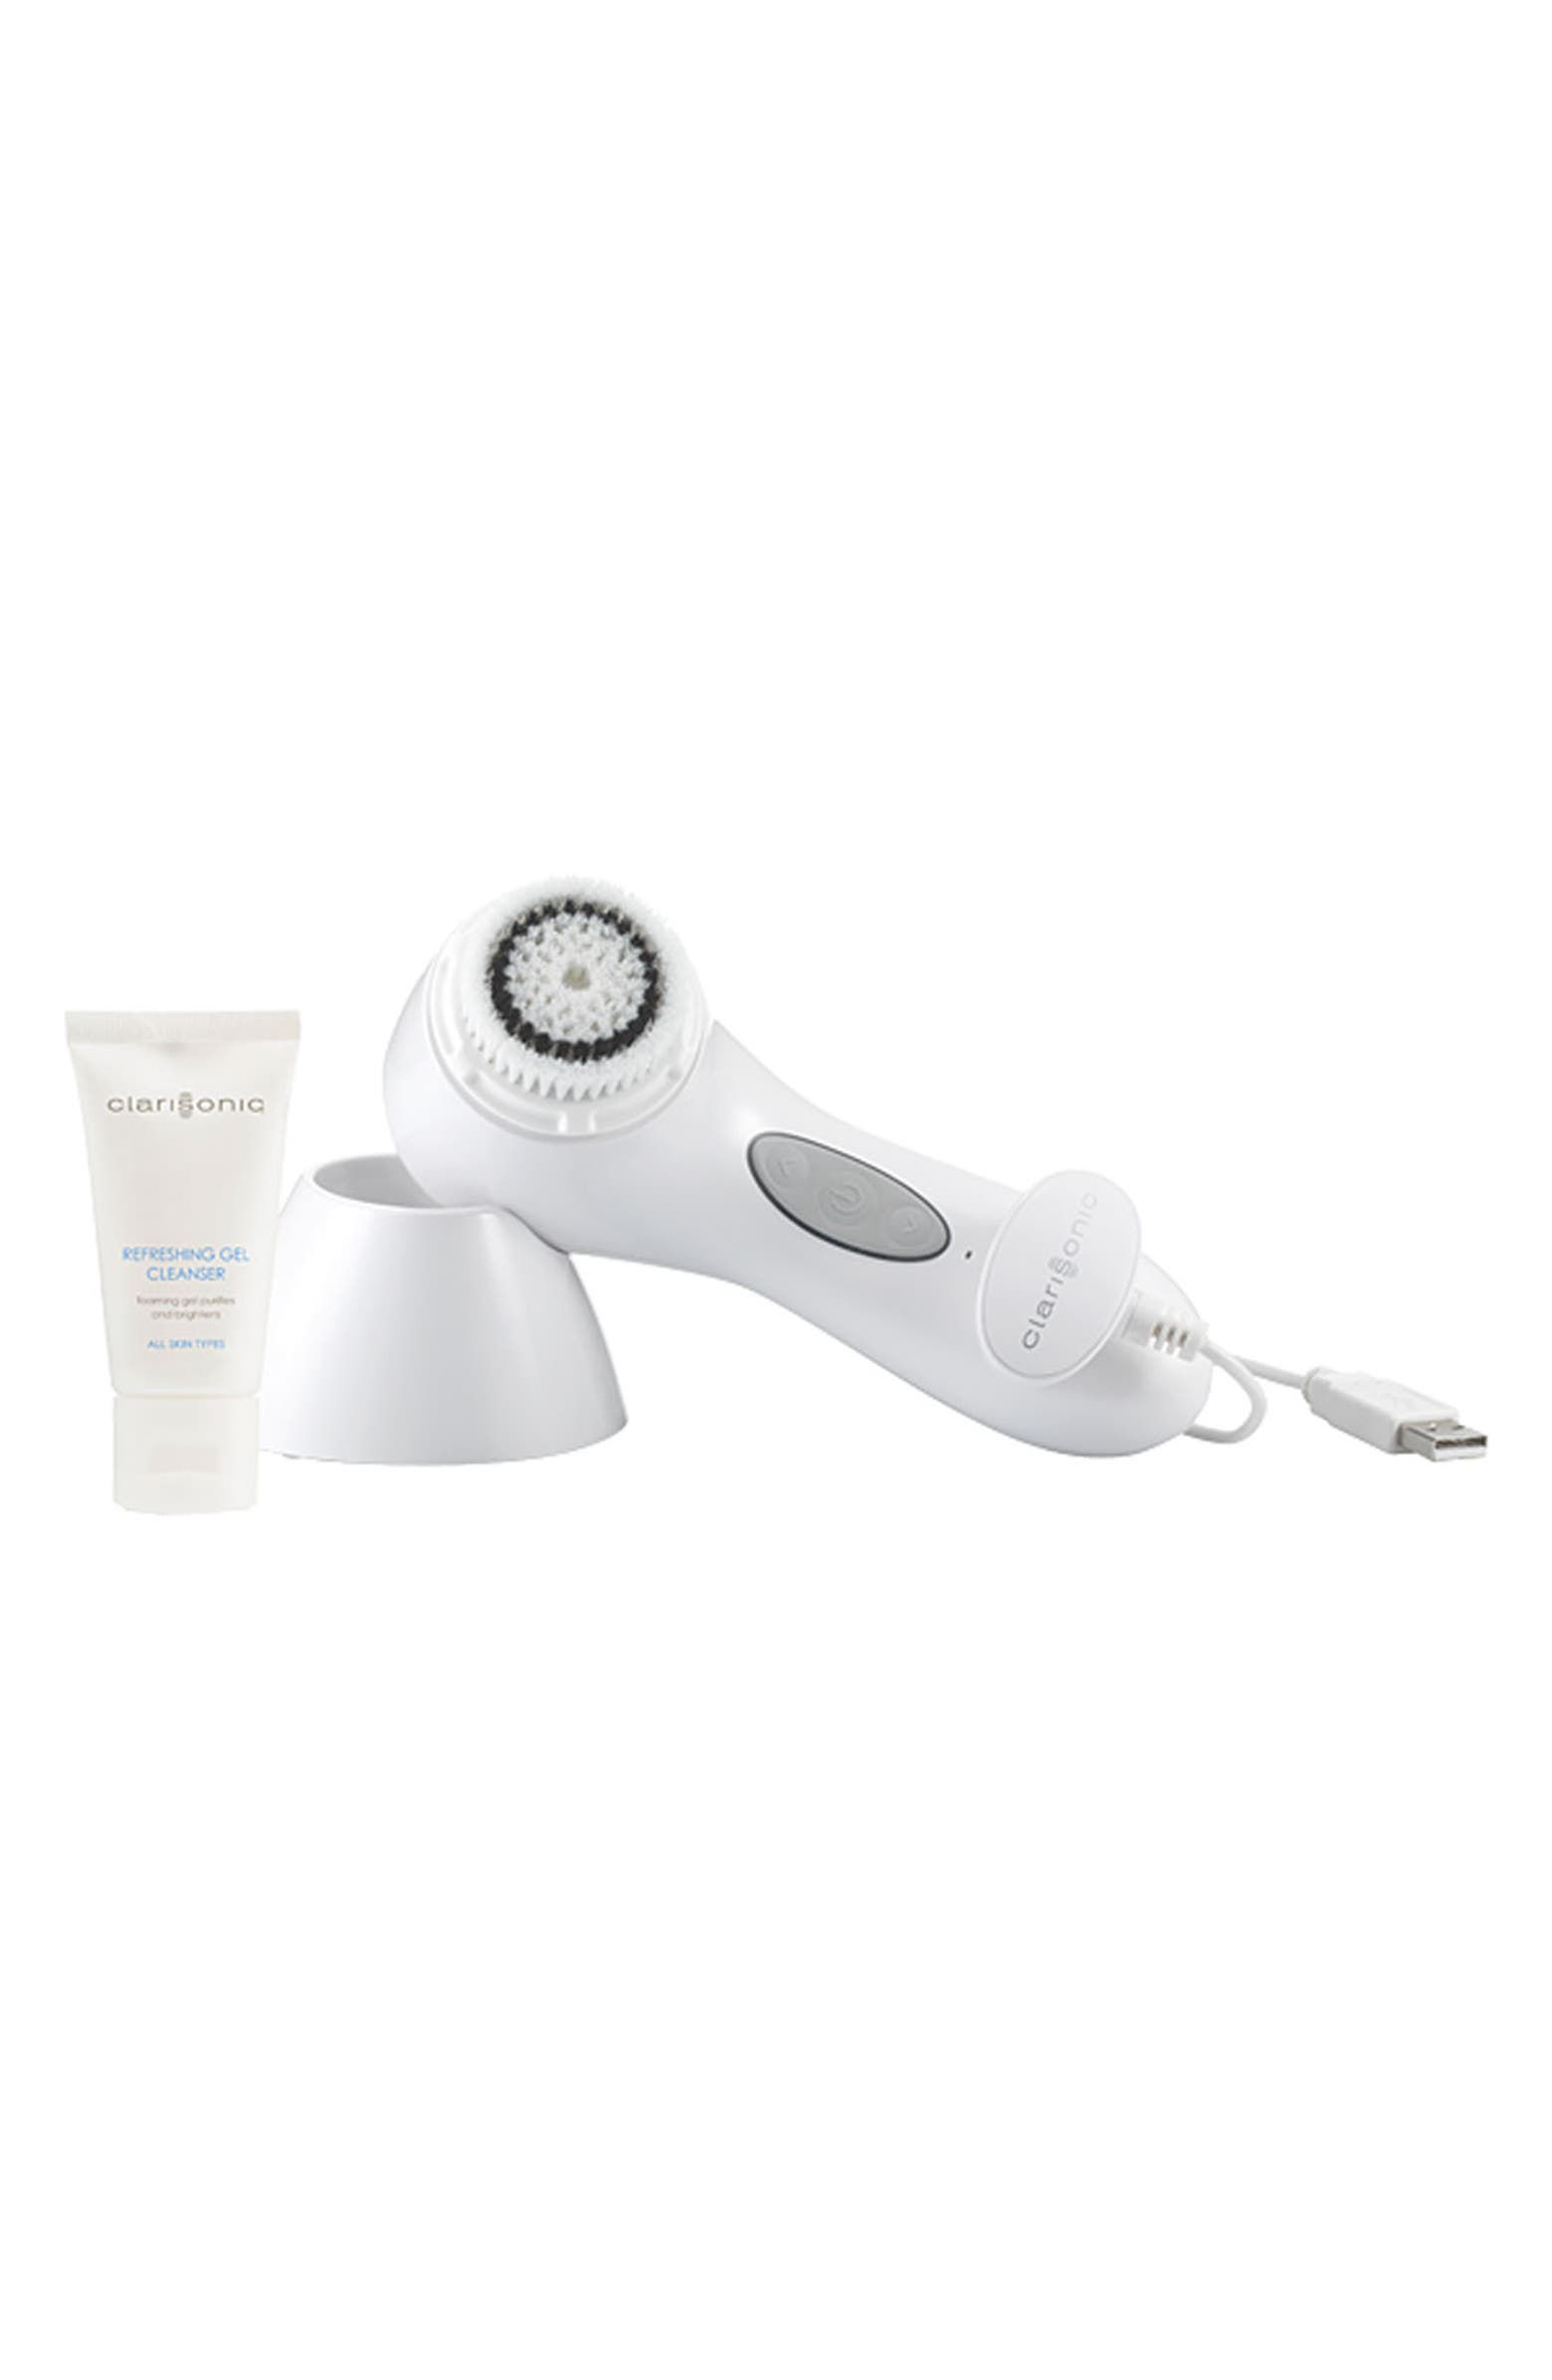 CLARISONIC 'Mia 3 - White' Sonic Skin Cleansing System | Nordstrom